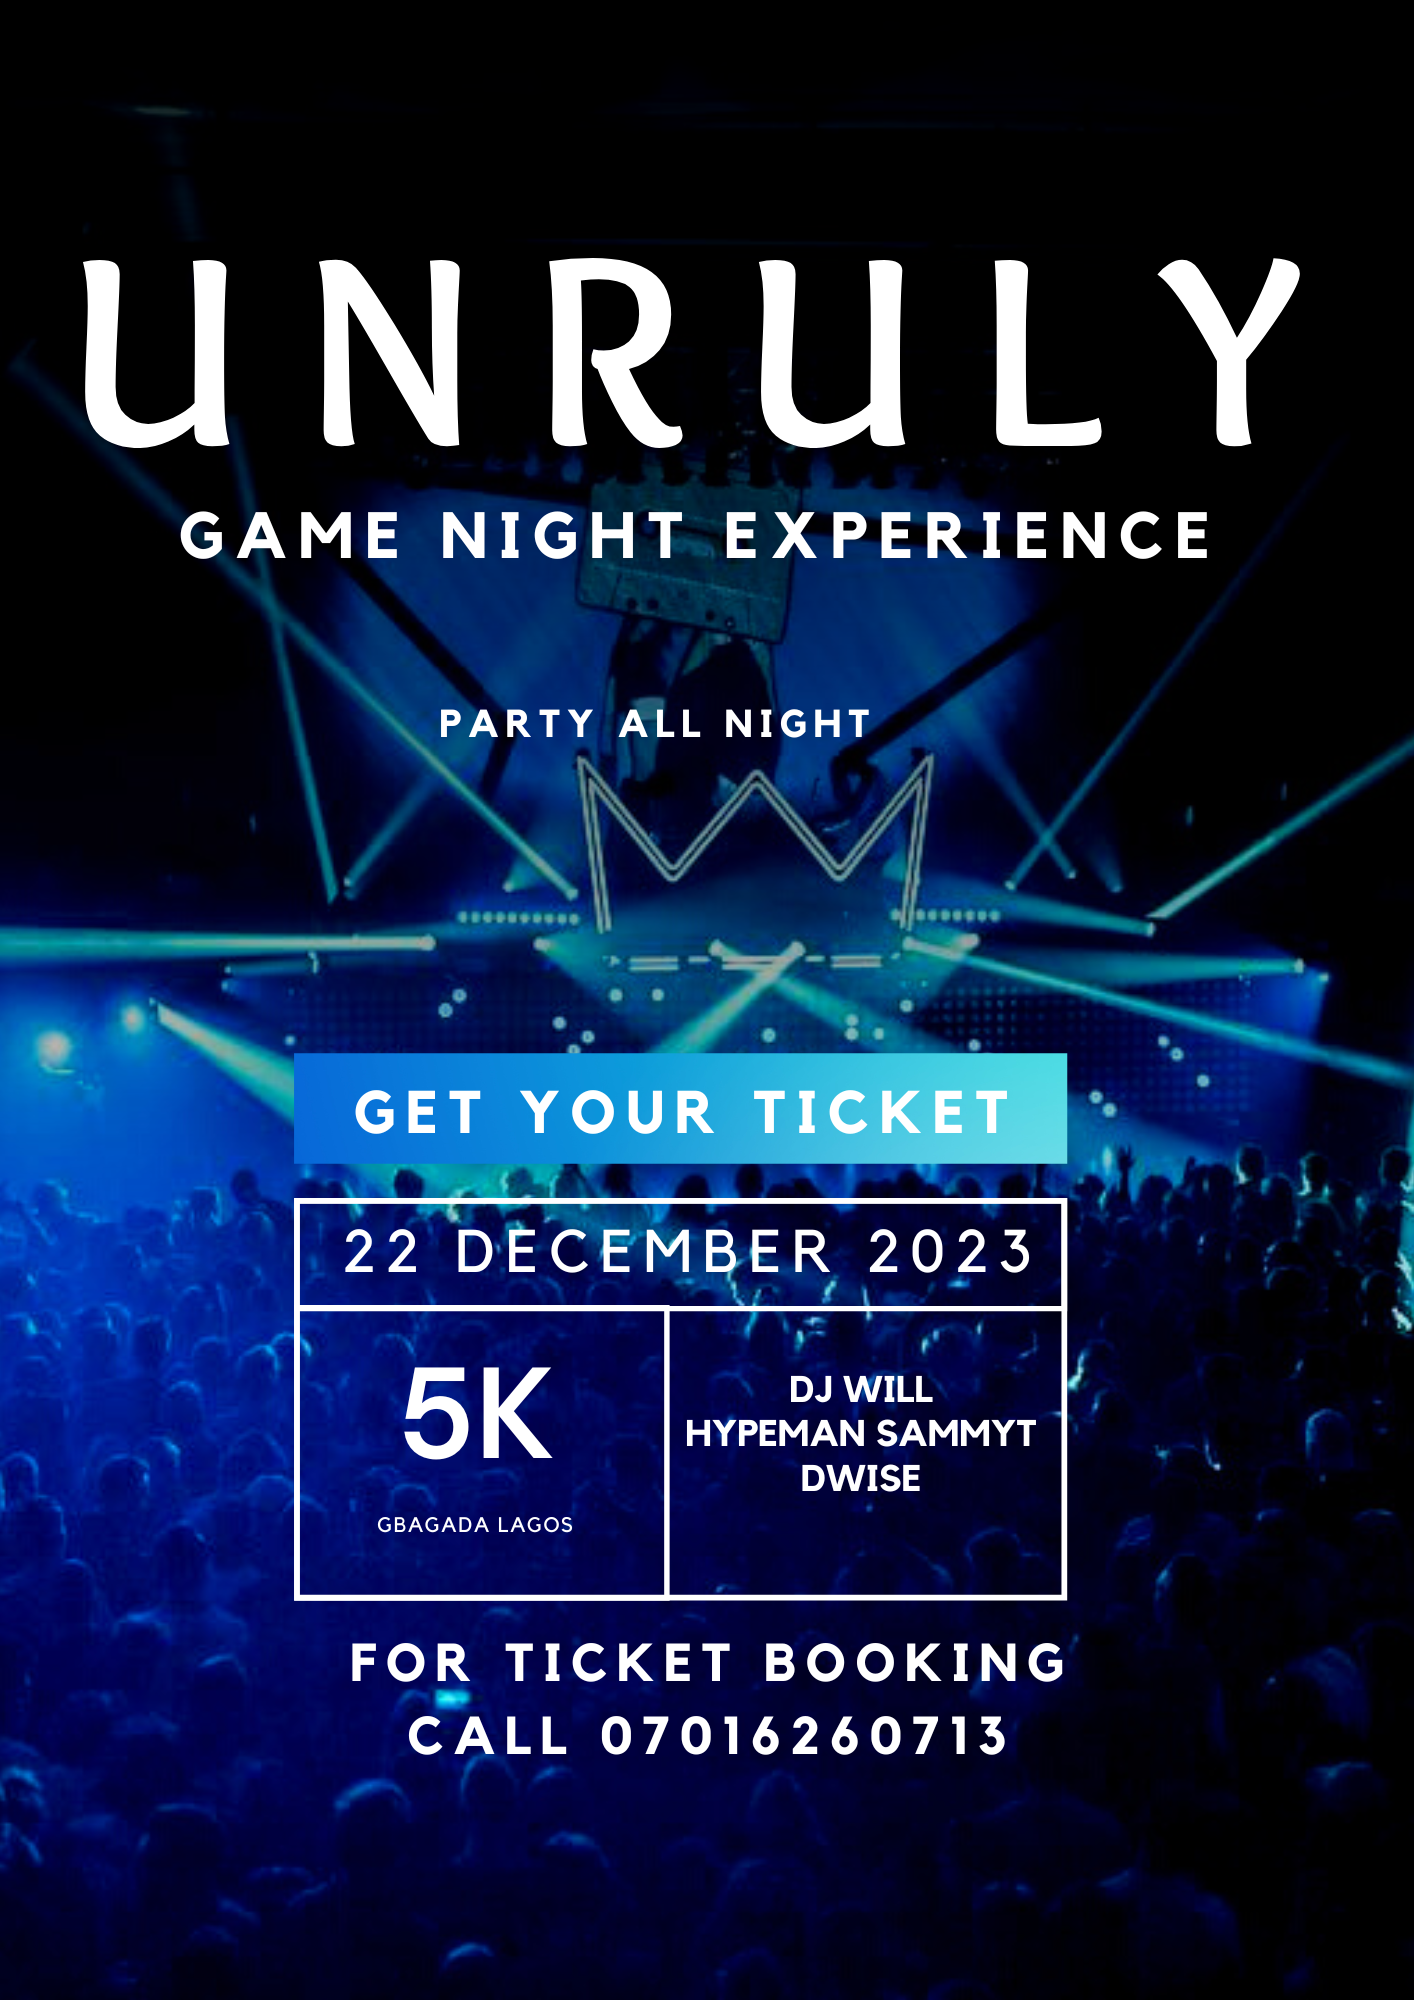 UNRULY GAME NIGHT EXPERIENCE Post free event in Nigeria using tickethub.ng, buy and sell tickets to event